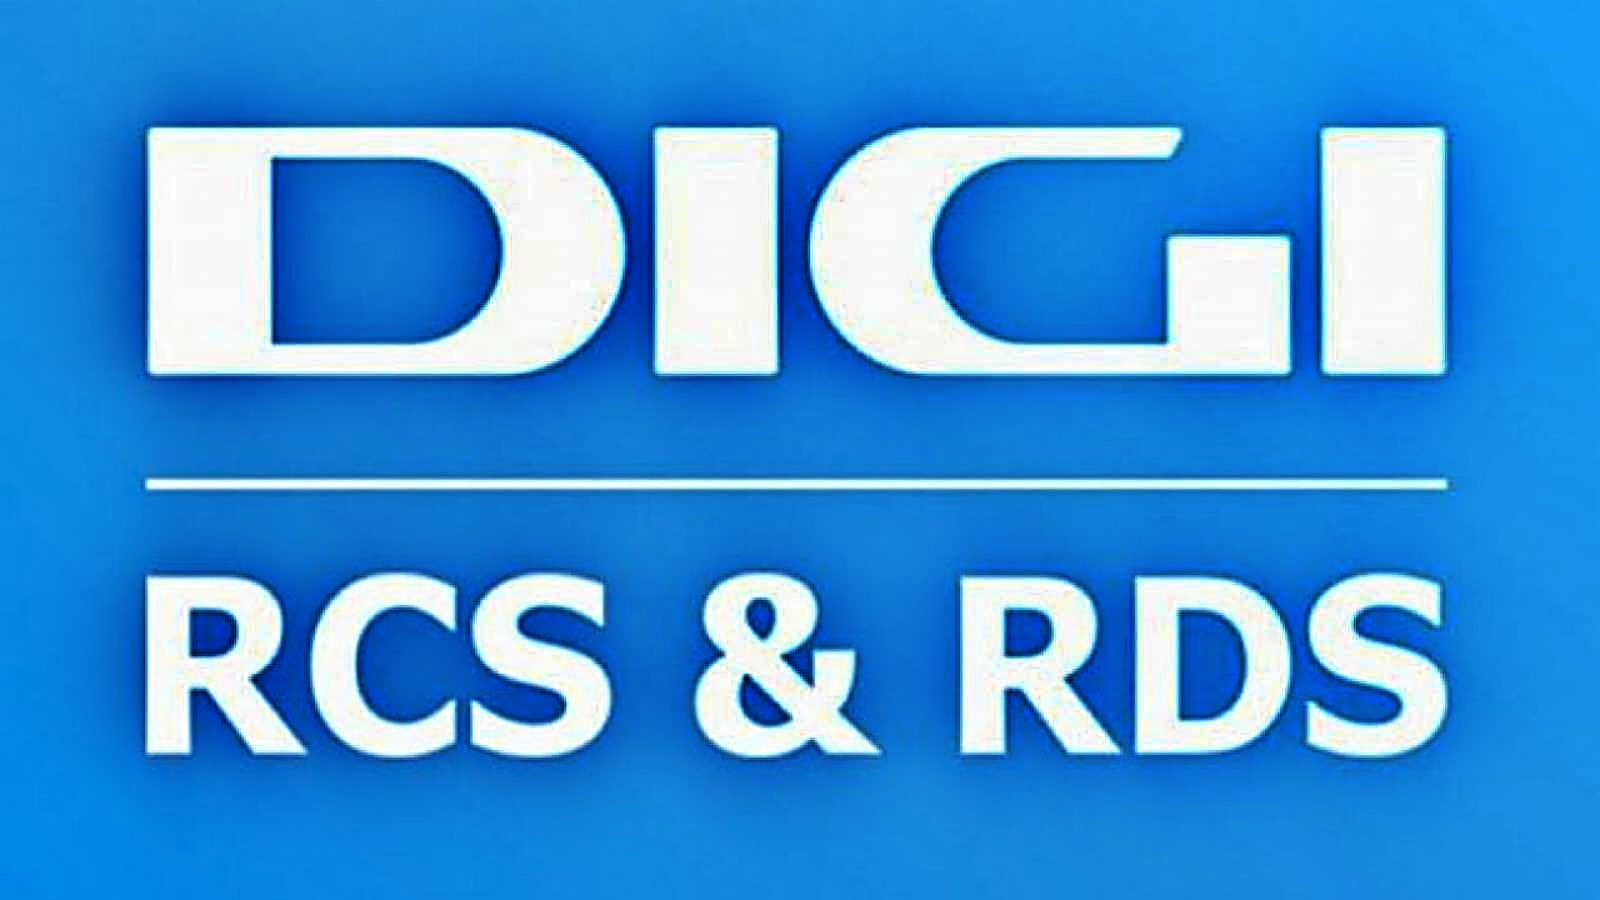 The Official DIGI RCS & RDS Action Offers 50% CHEAPER to Romanians